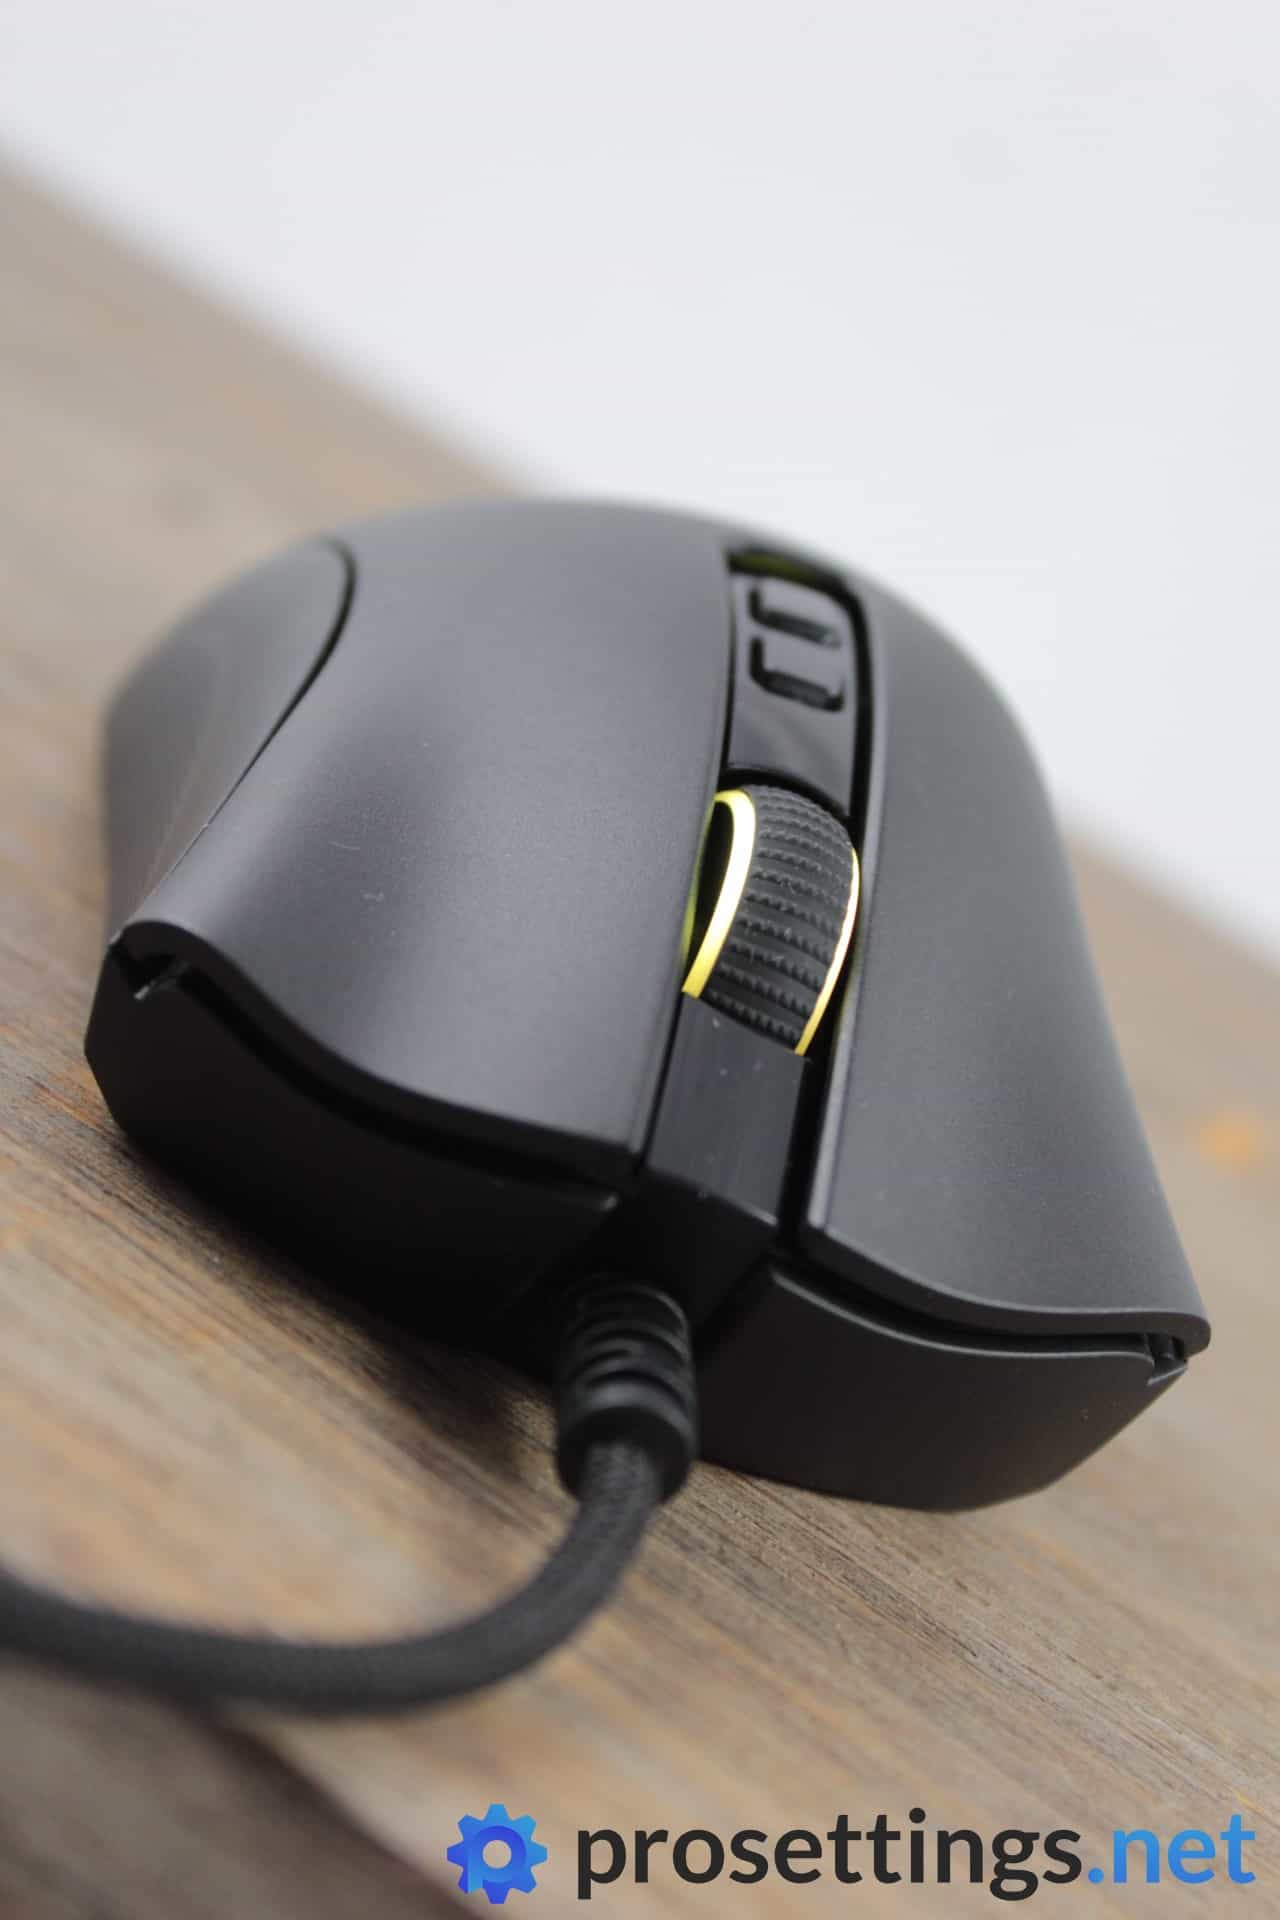 Razer DeathAdder V2 Review Buttons and Scroll 2